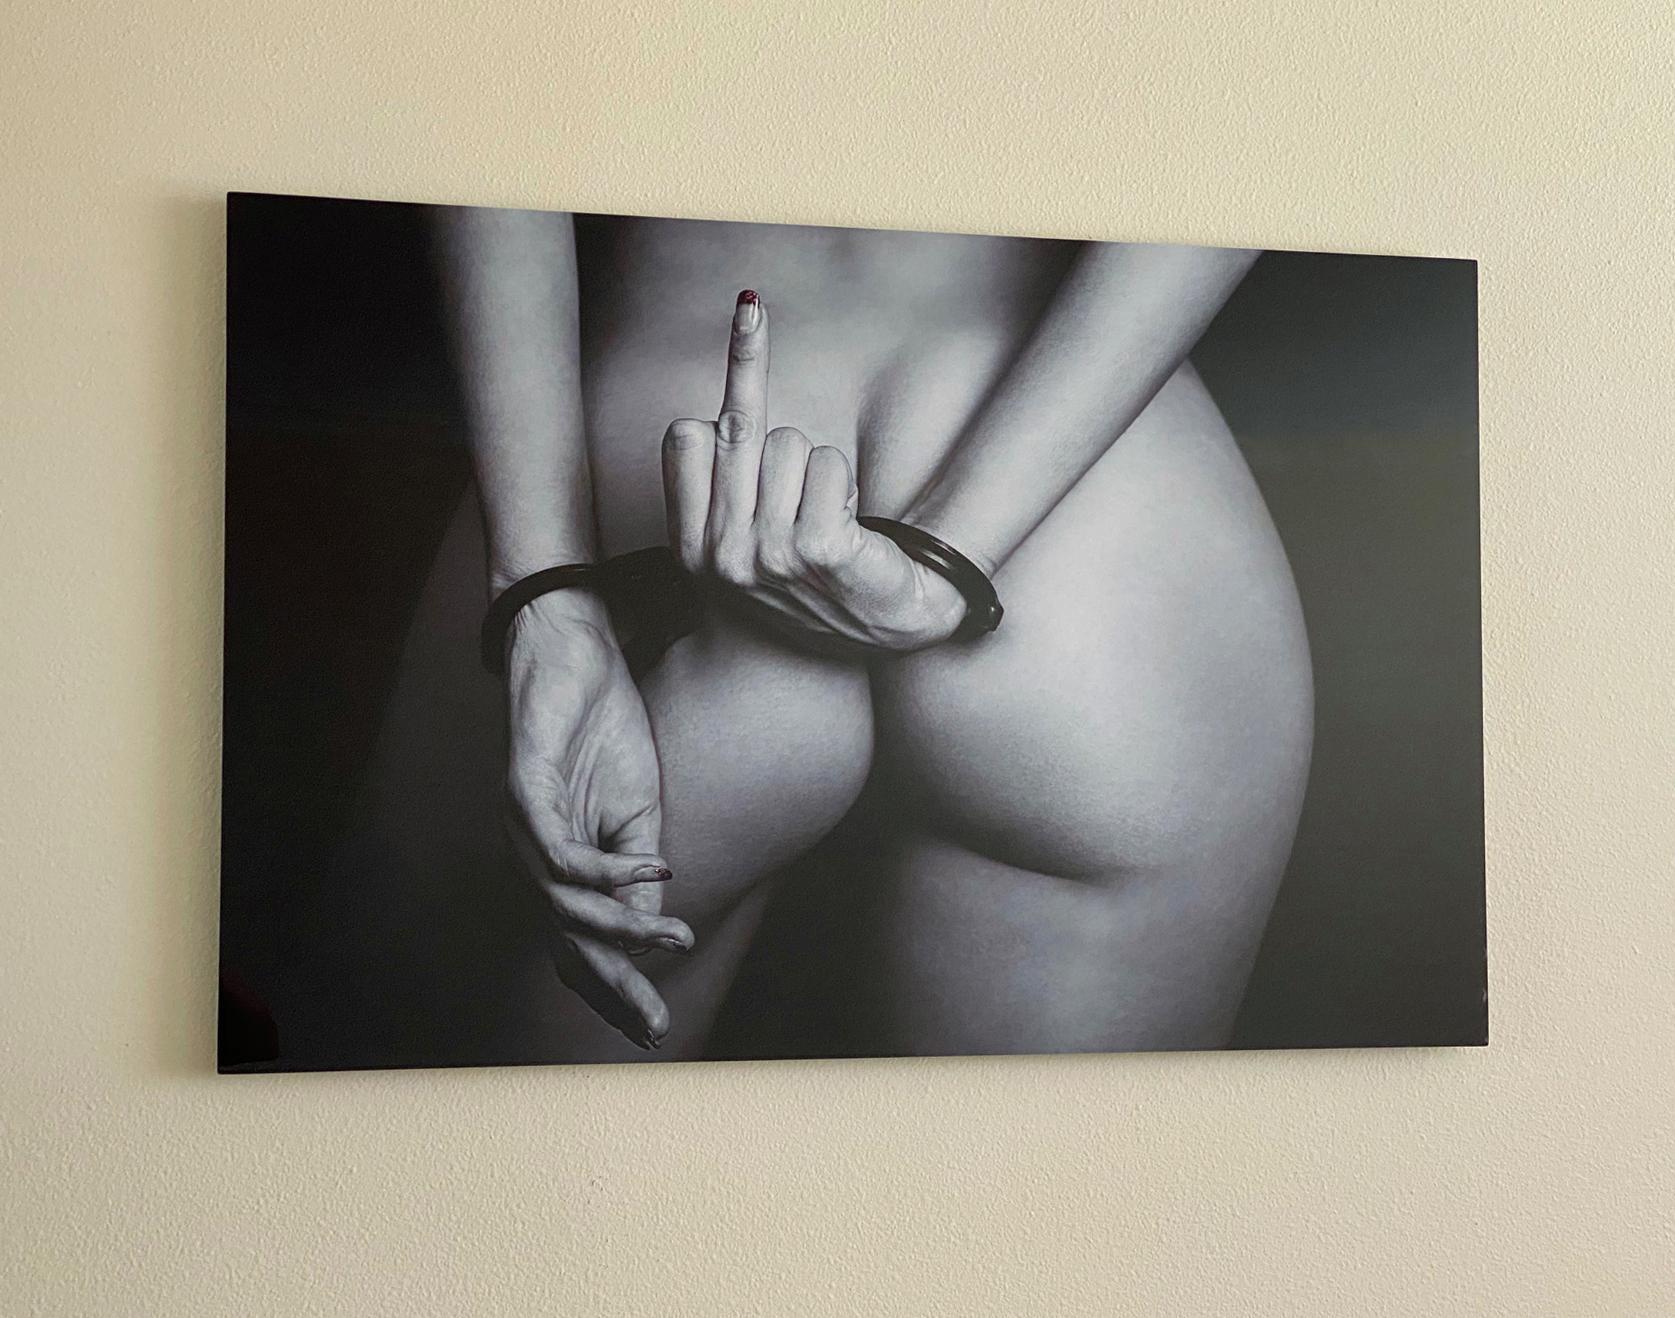 No Way - black & white nude photograph - print on aluminum - Photograph by Alex Sher